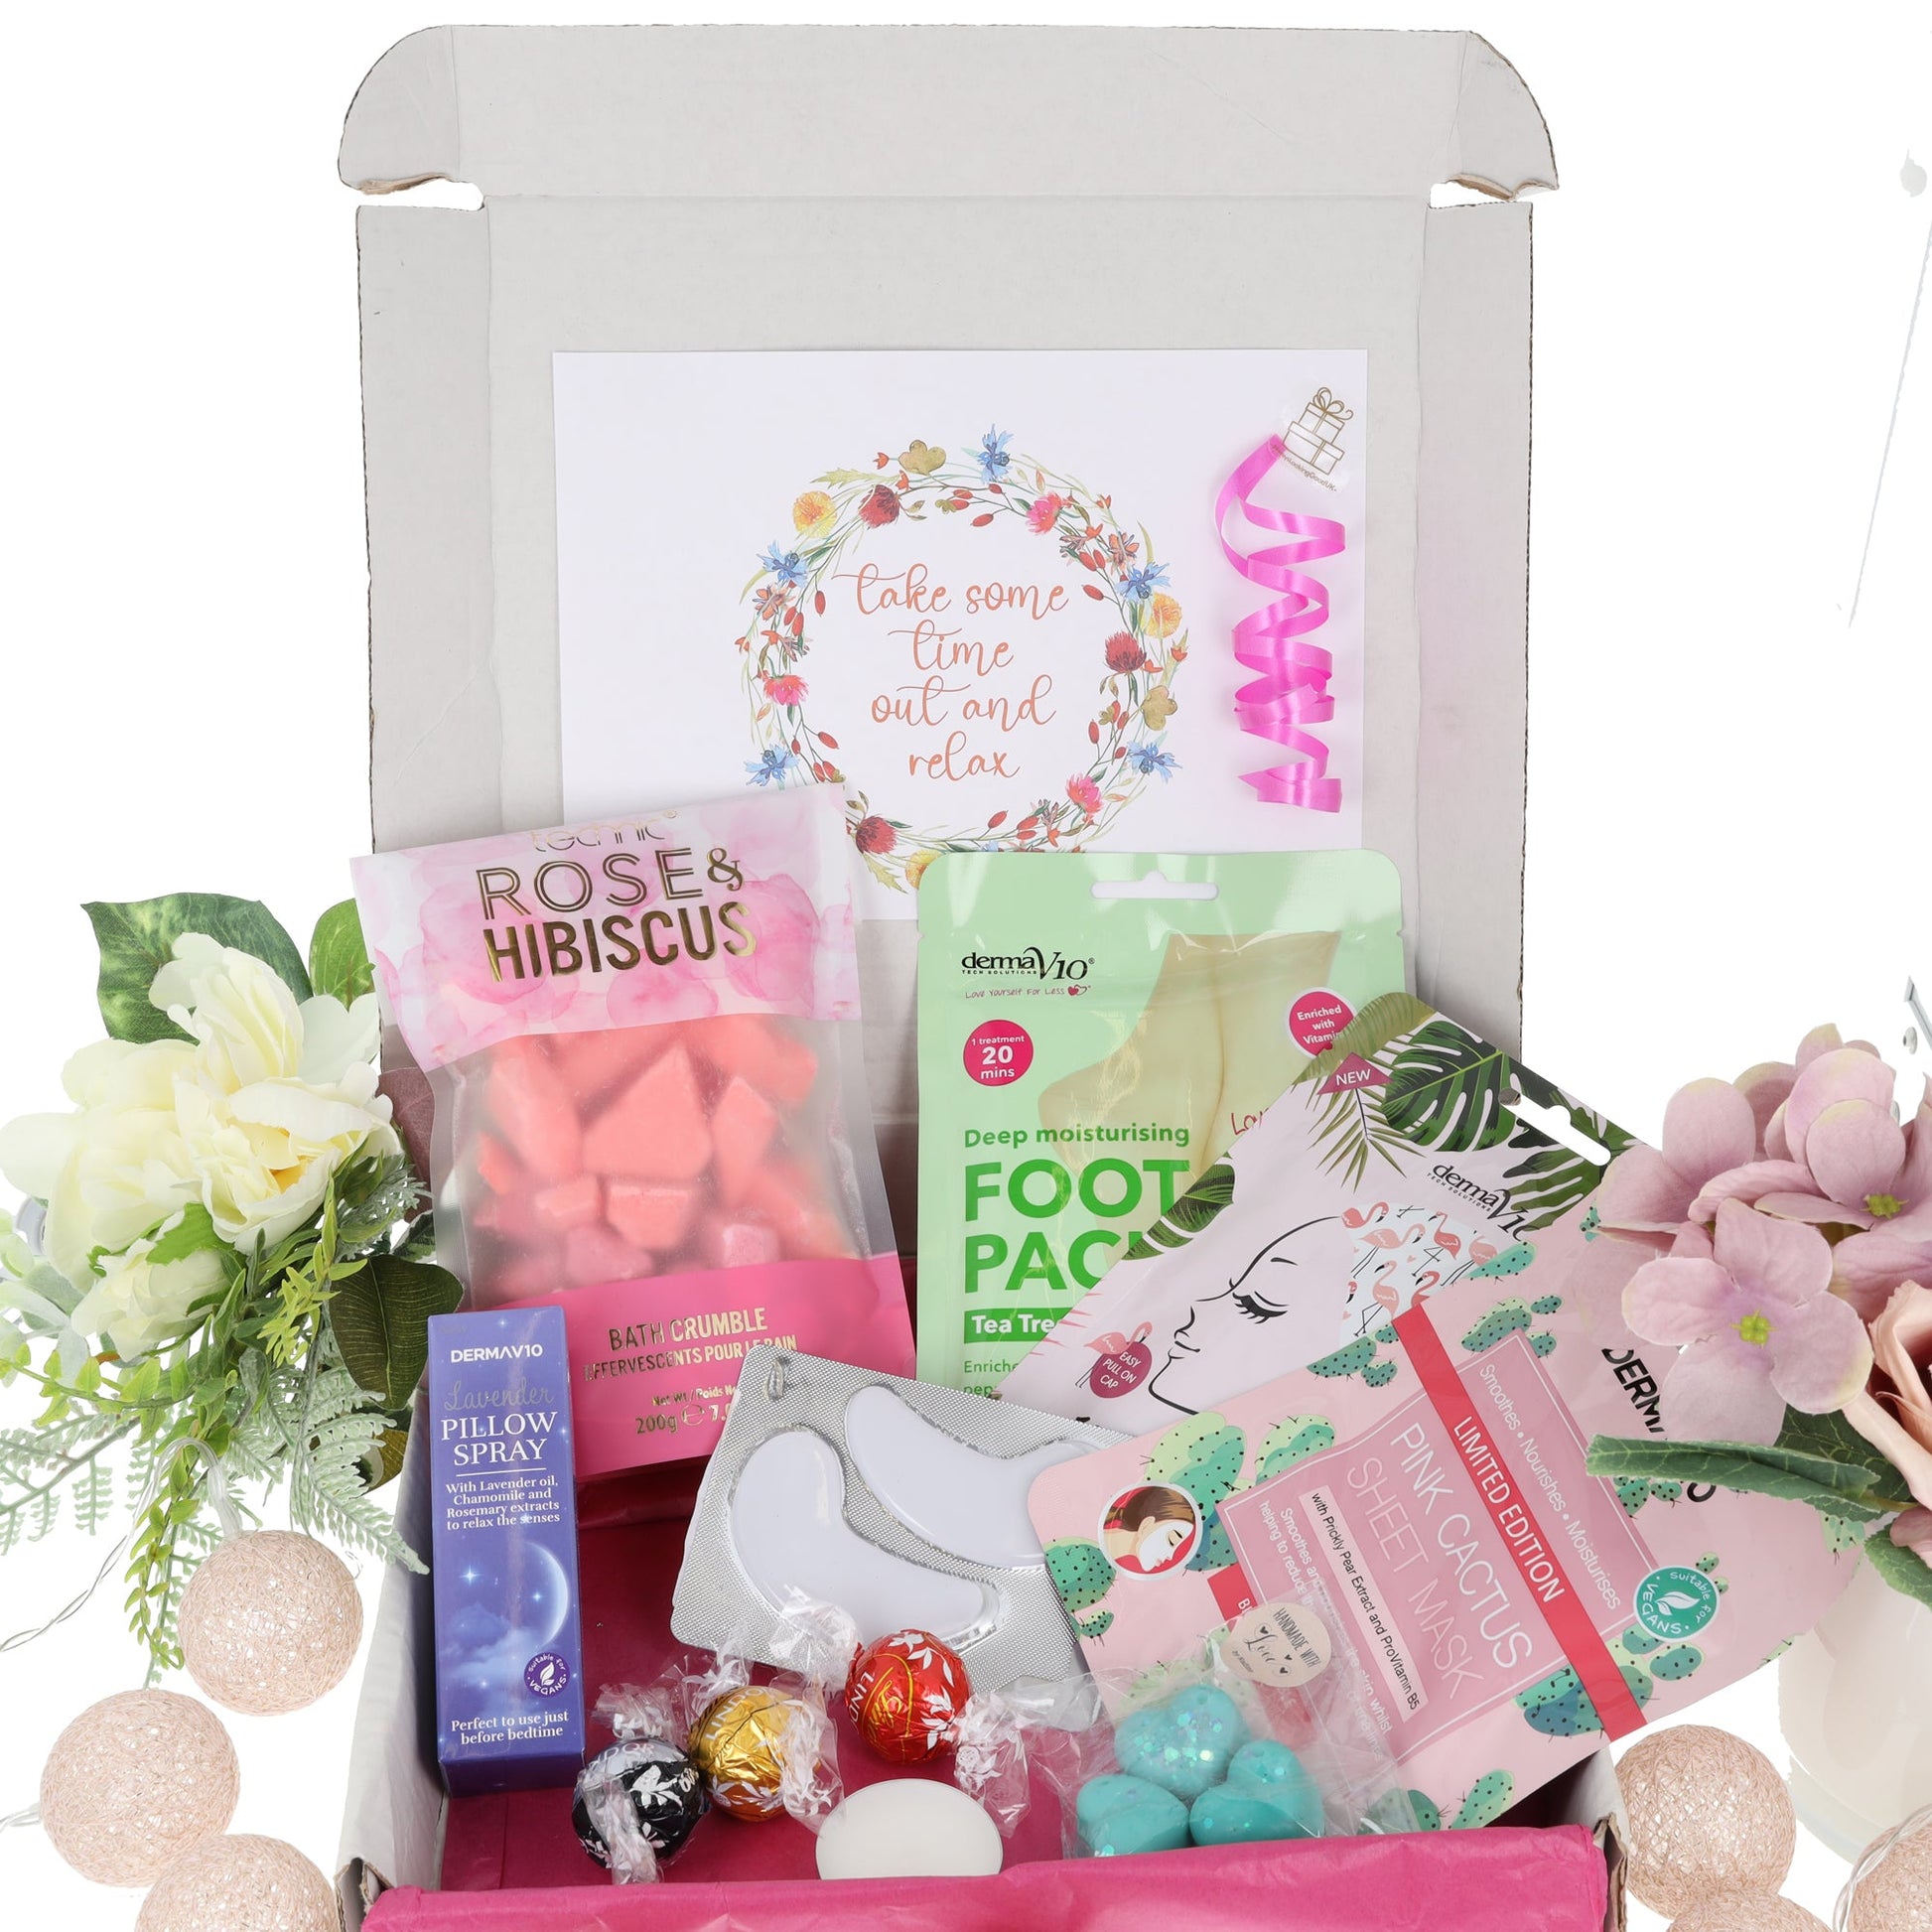 Happy Birthday Bath Crumble and Pamper Gift Pamper Hamper Large Set  - Always Looking Good -   